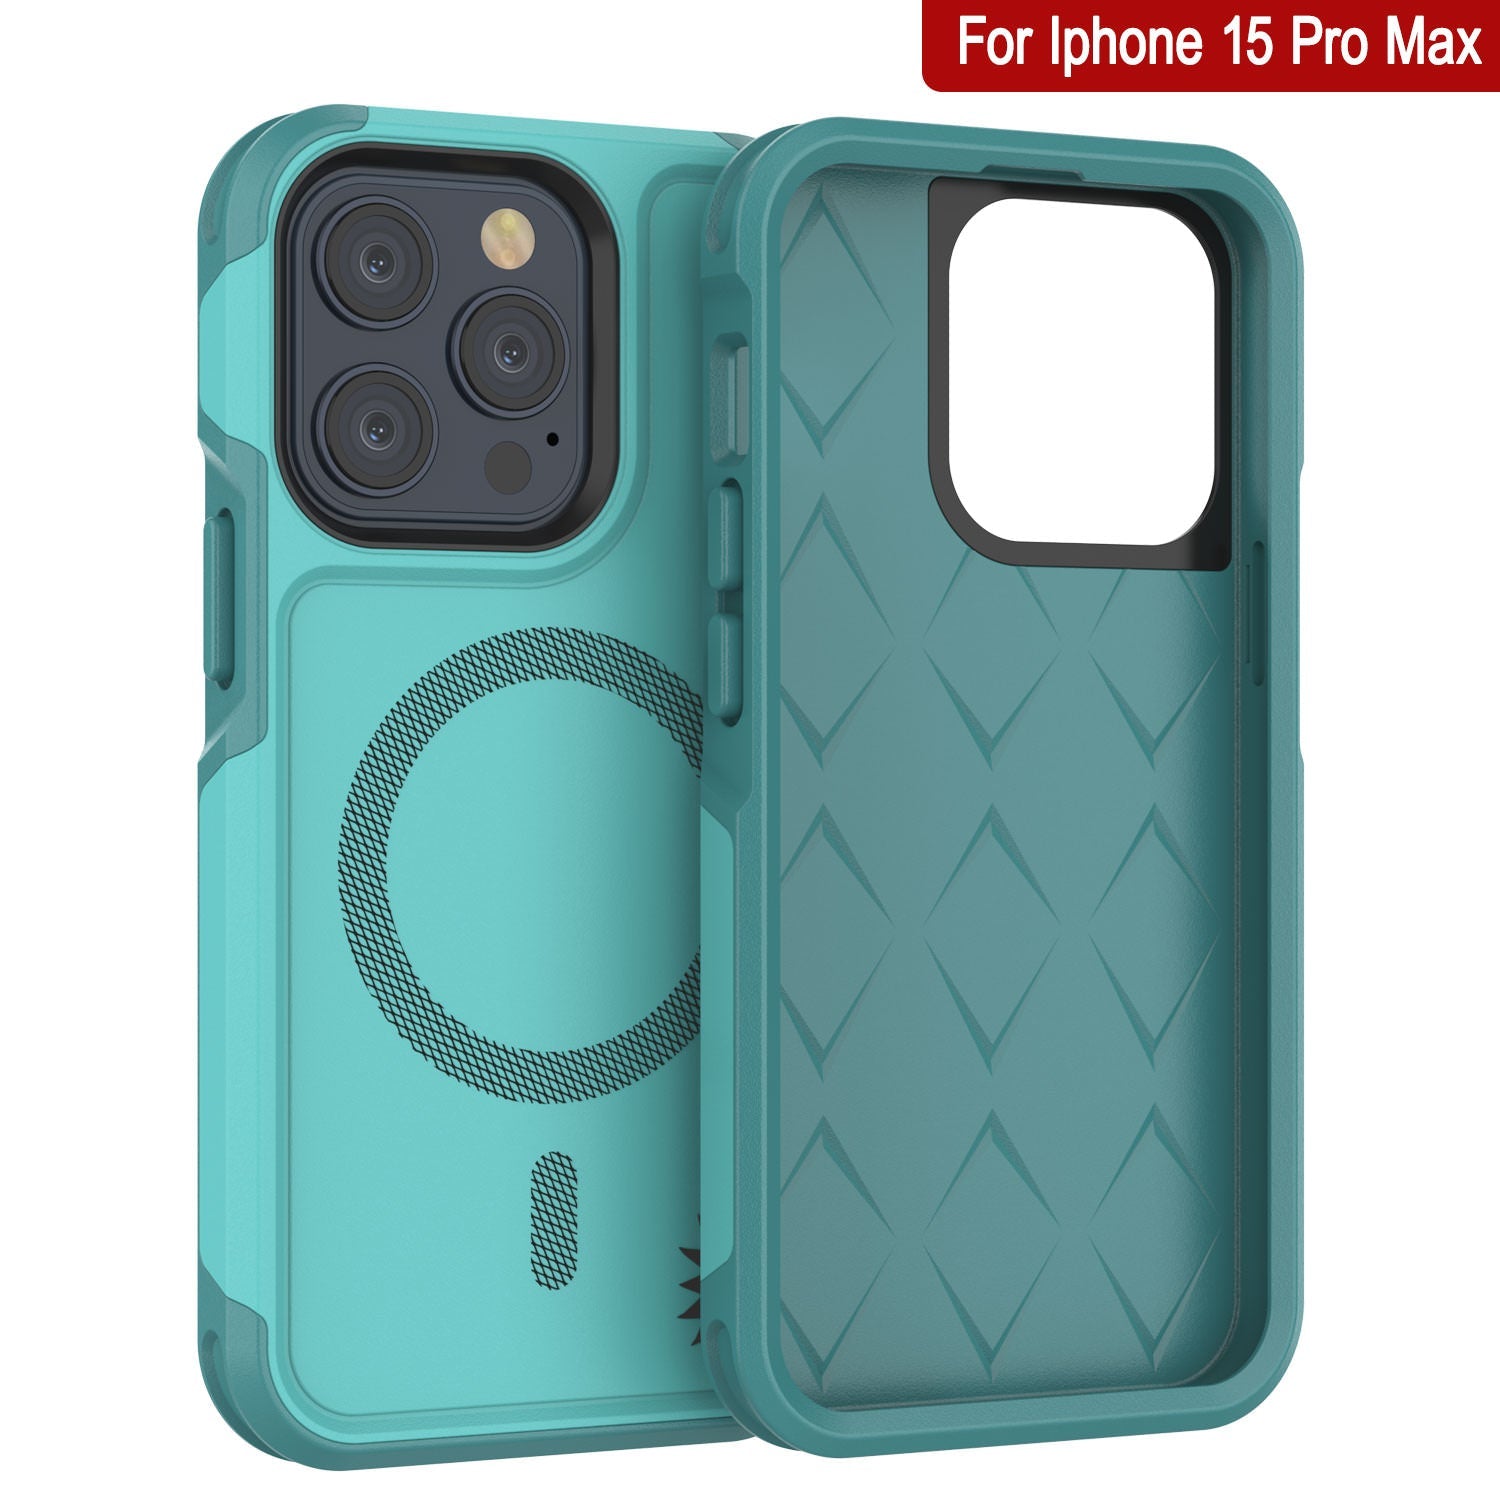 PunkCase iPhone 15 Pro Max Case, [Spartan 2.0 Series] Clear Rugged Heavy Duty Cover W/Built in Screen Protector [Blue]